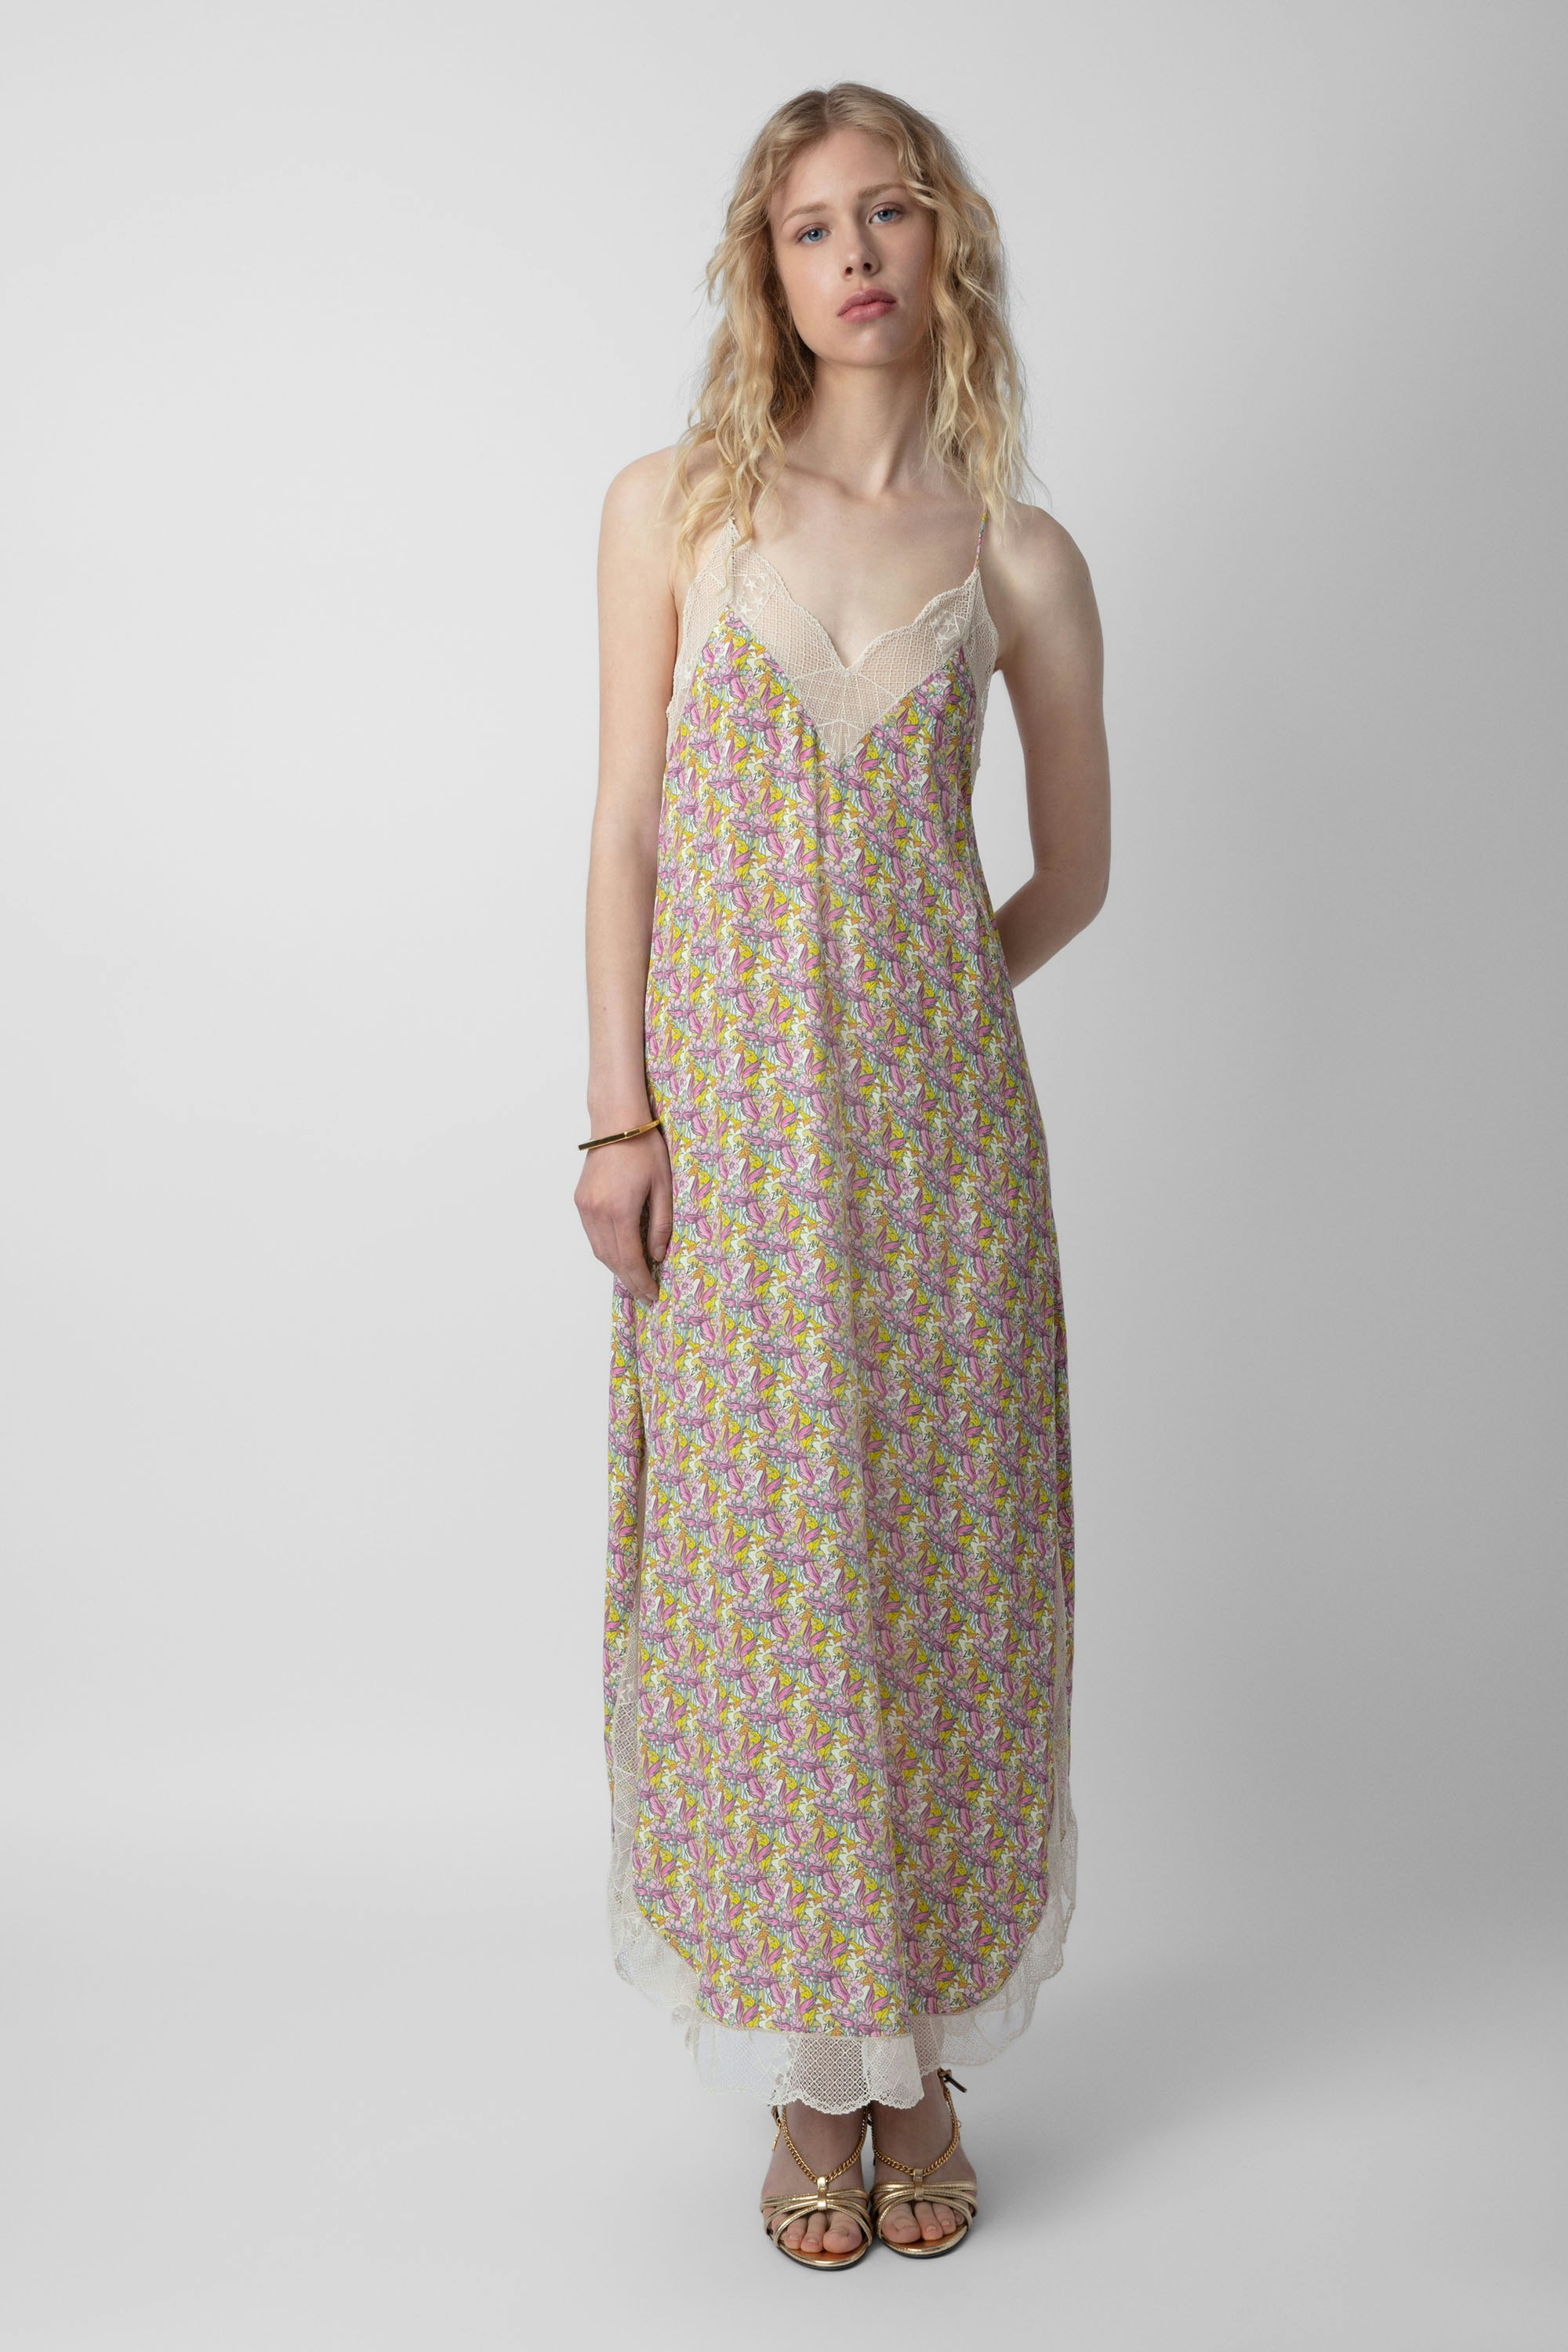 Ristyl Dress - Women's long yellow crepe dress featuring liberty print and wings.